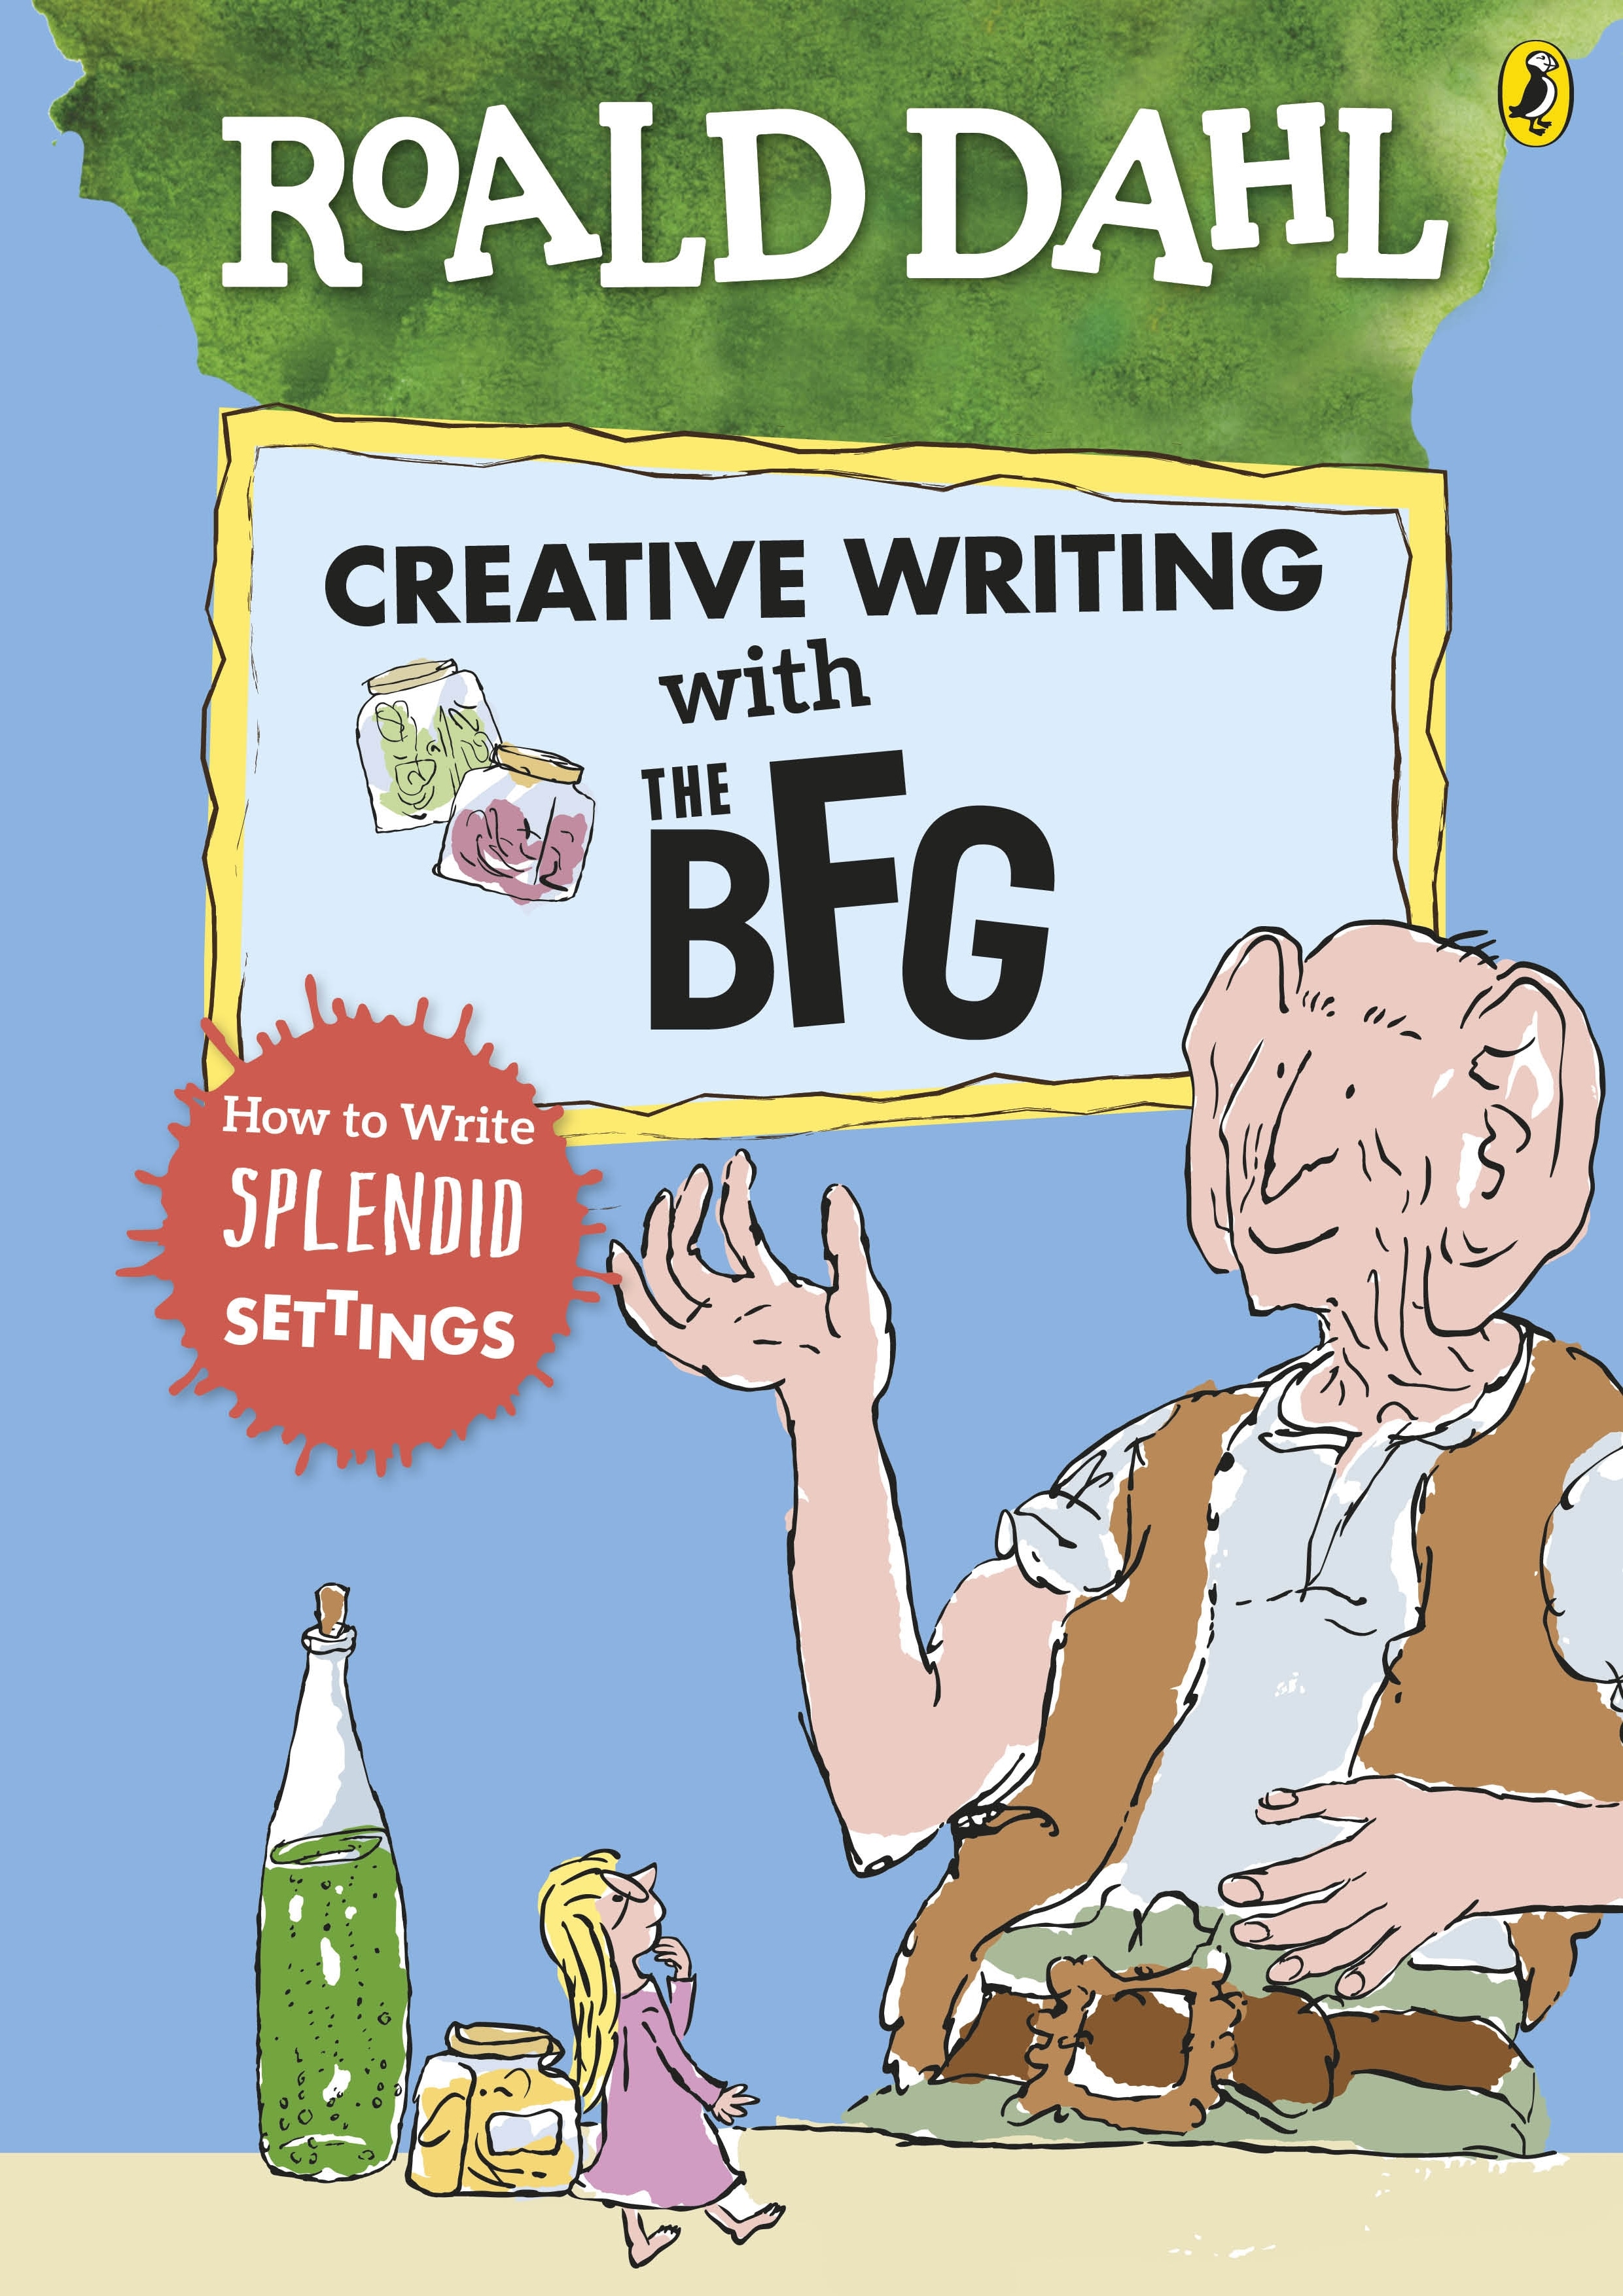 Book “Roald Dahl's Creative Writing with The BFG: How to Write Splendid Settings” by Roald Dahl, Quentin Blake — January 24, 2019